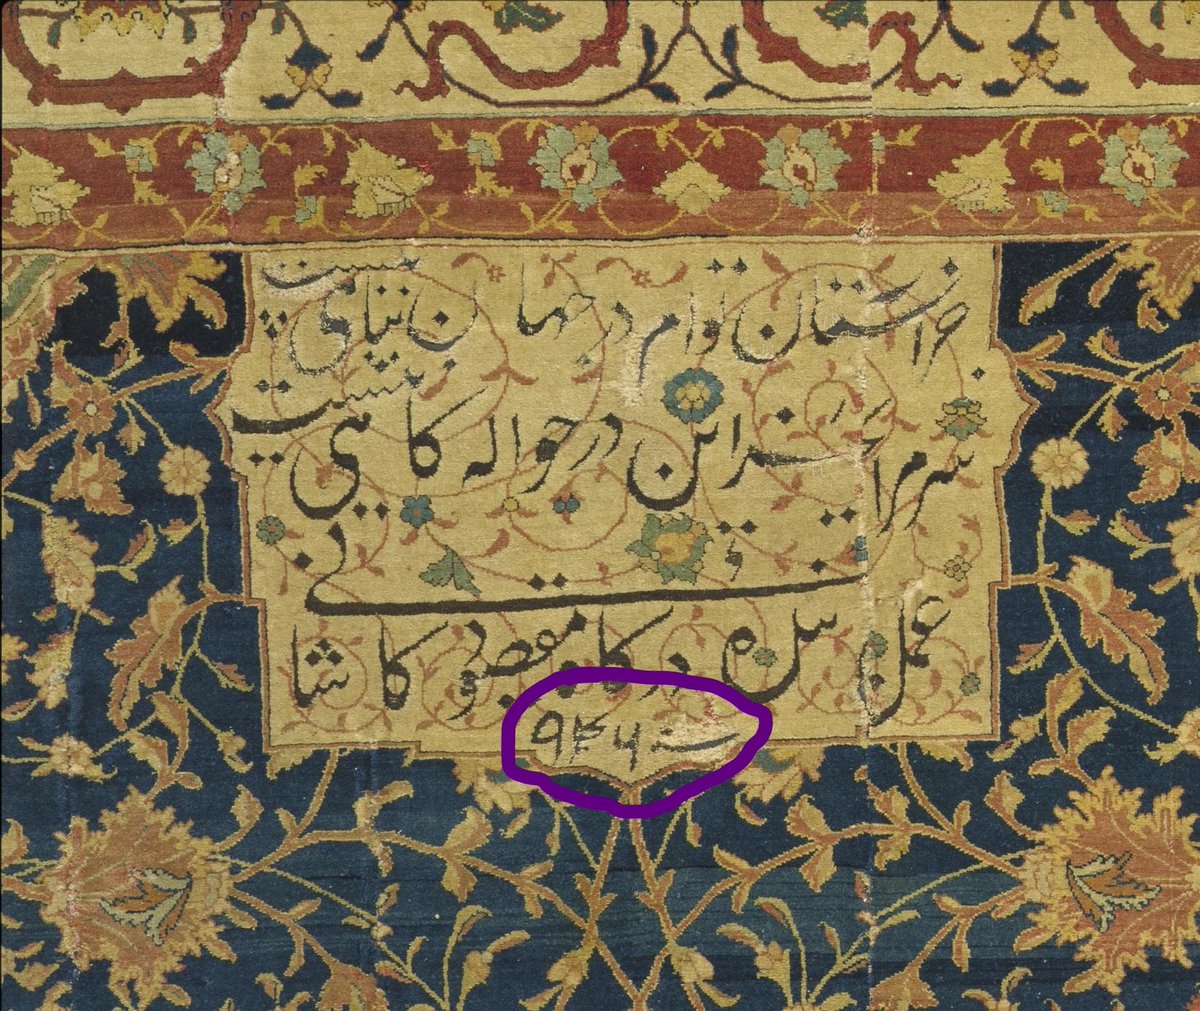 Finally, right at the bottom, we get that all-important date:سنه 946The year 946.946 is given in the Islamic (Hijri) calendar - this is equivalent to 1539-40 CE. (5/7)